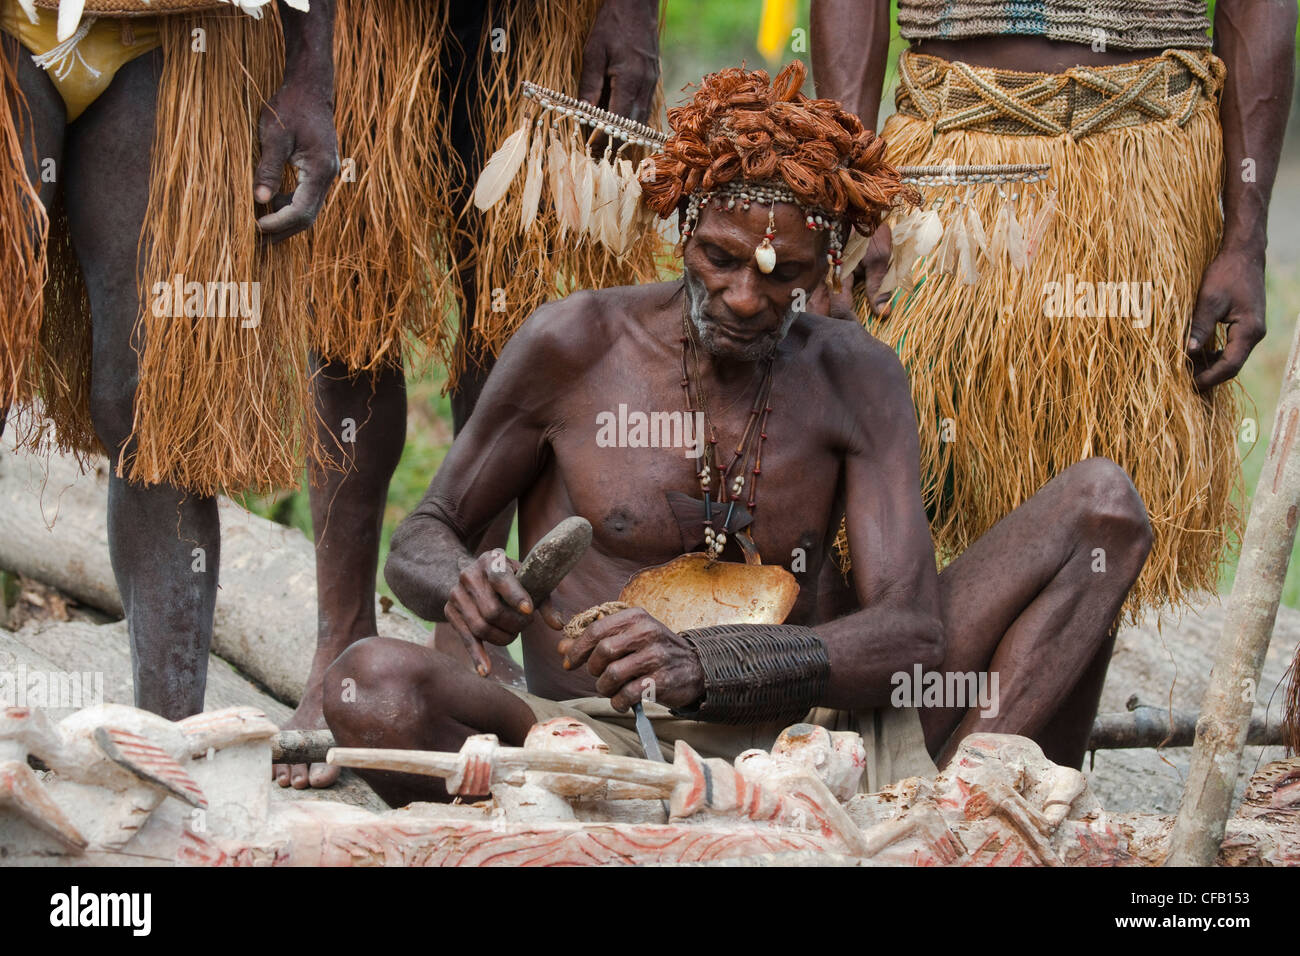 Man from the Asmat Tribe carving with a chisel, Agats village, New Guinea, Indonesia Stock Photo